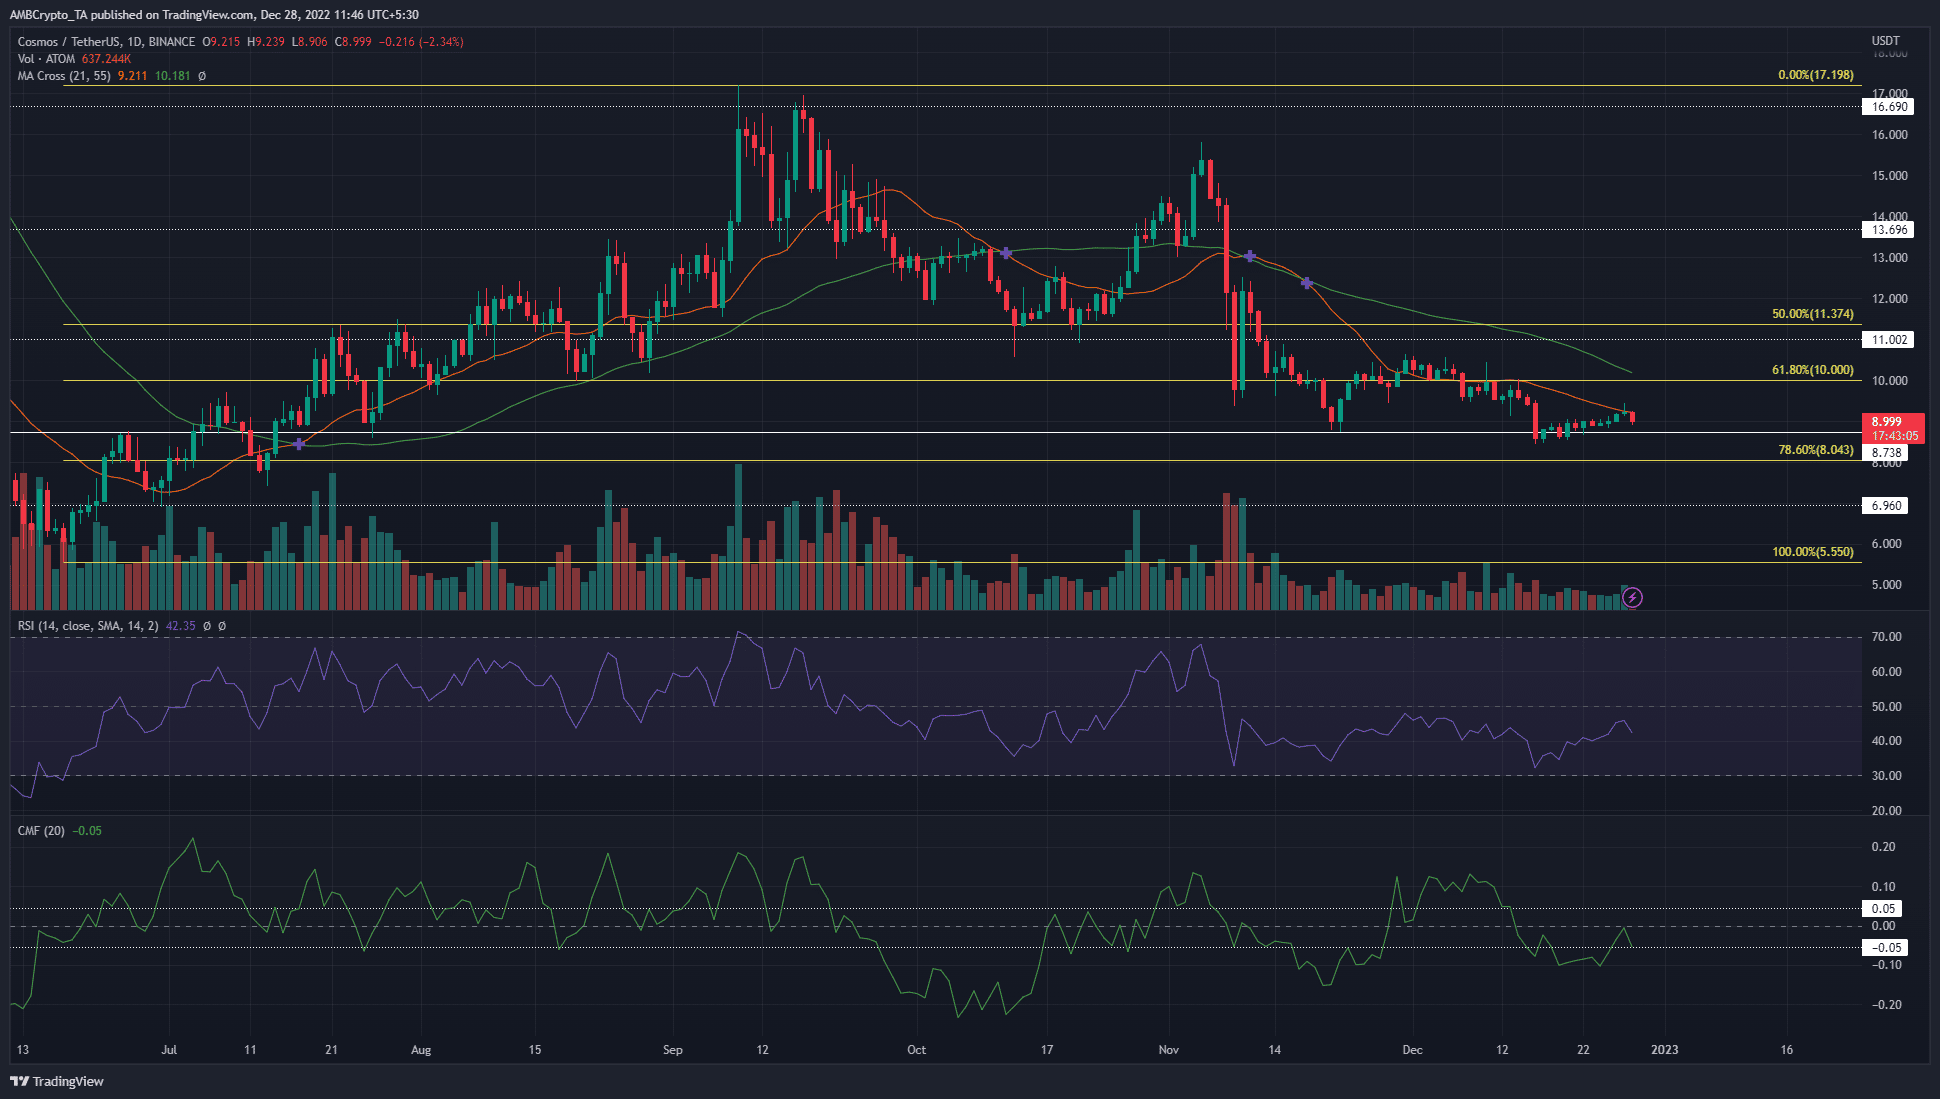 Cosmos [ATOM] retests $8.7 but should bulls be hopeful of recovery?